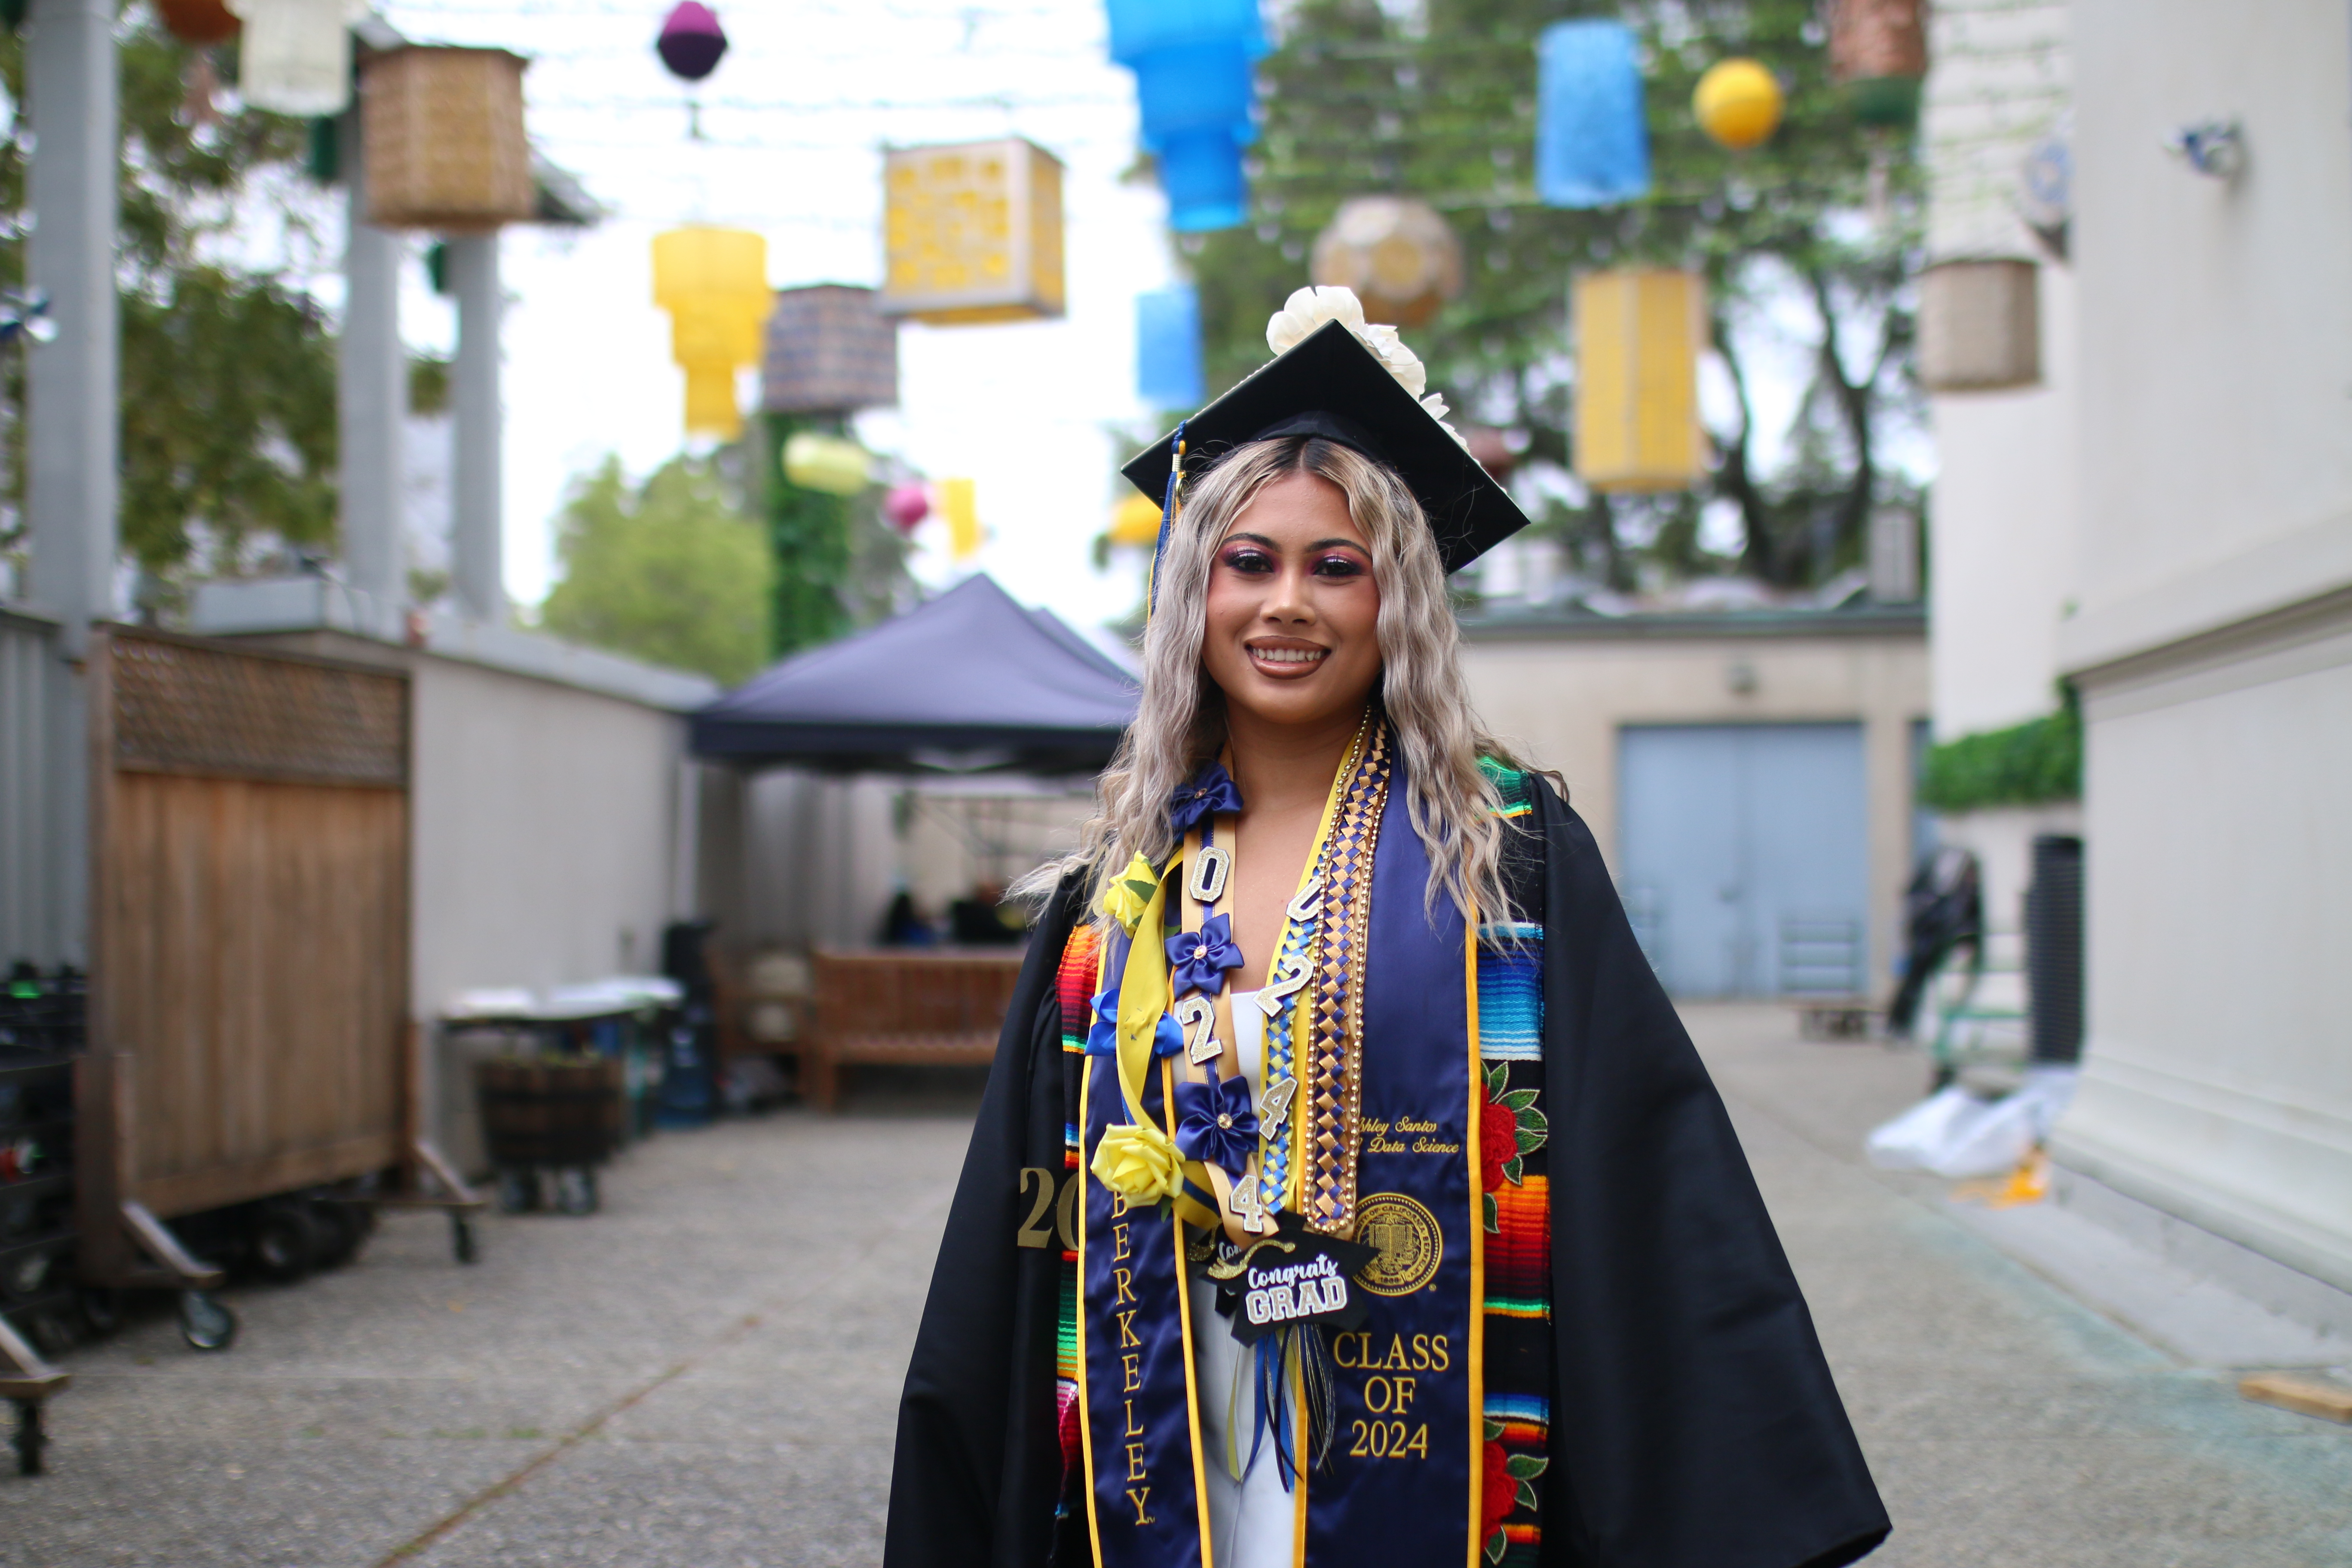 Ashley Santos is a UC Berkeley student graduating with a degree in data science.